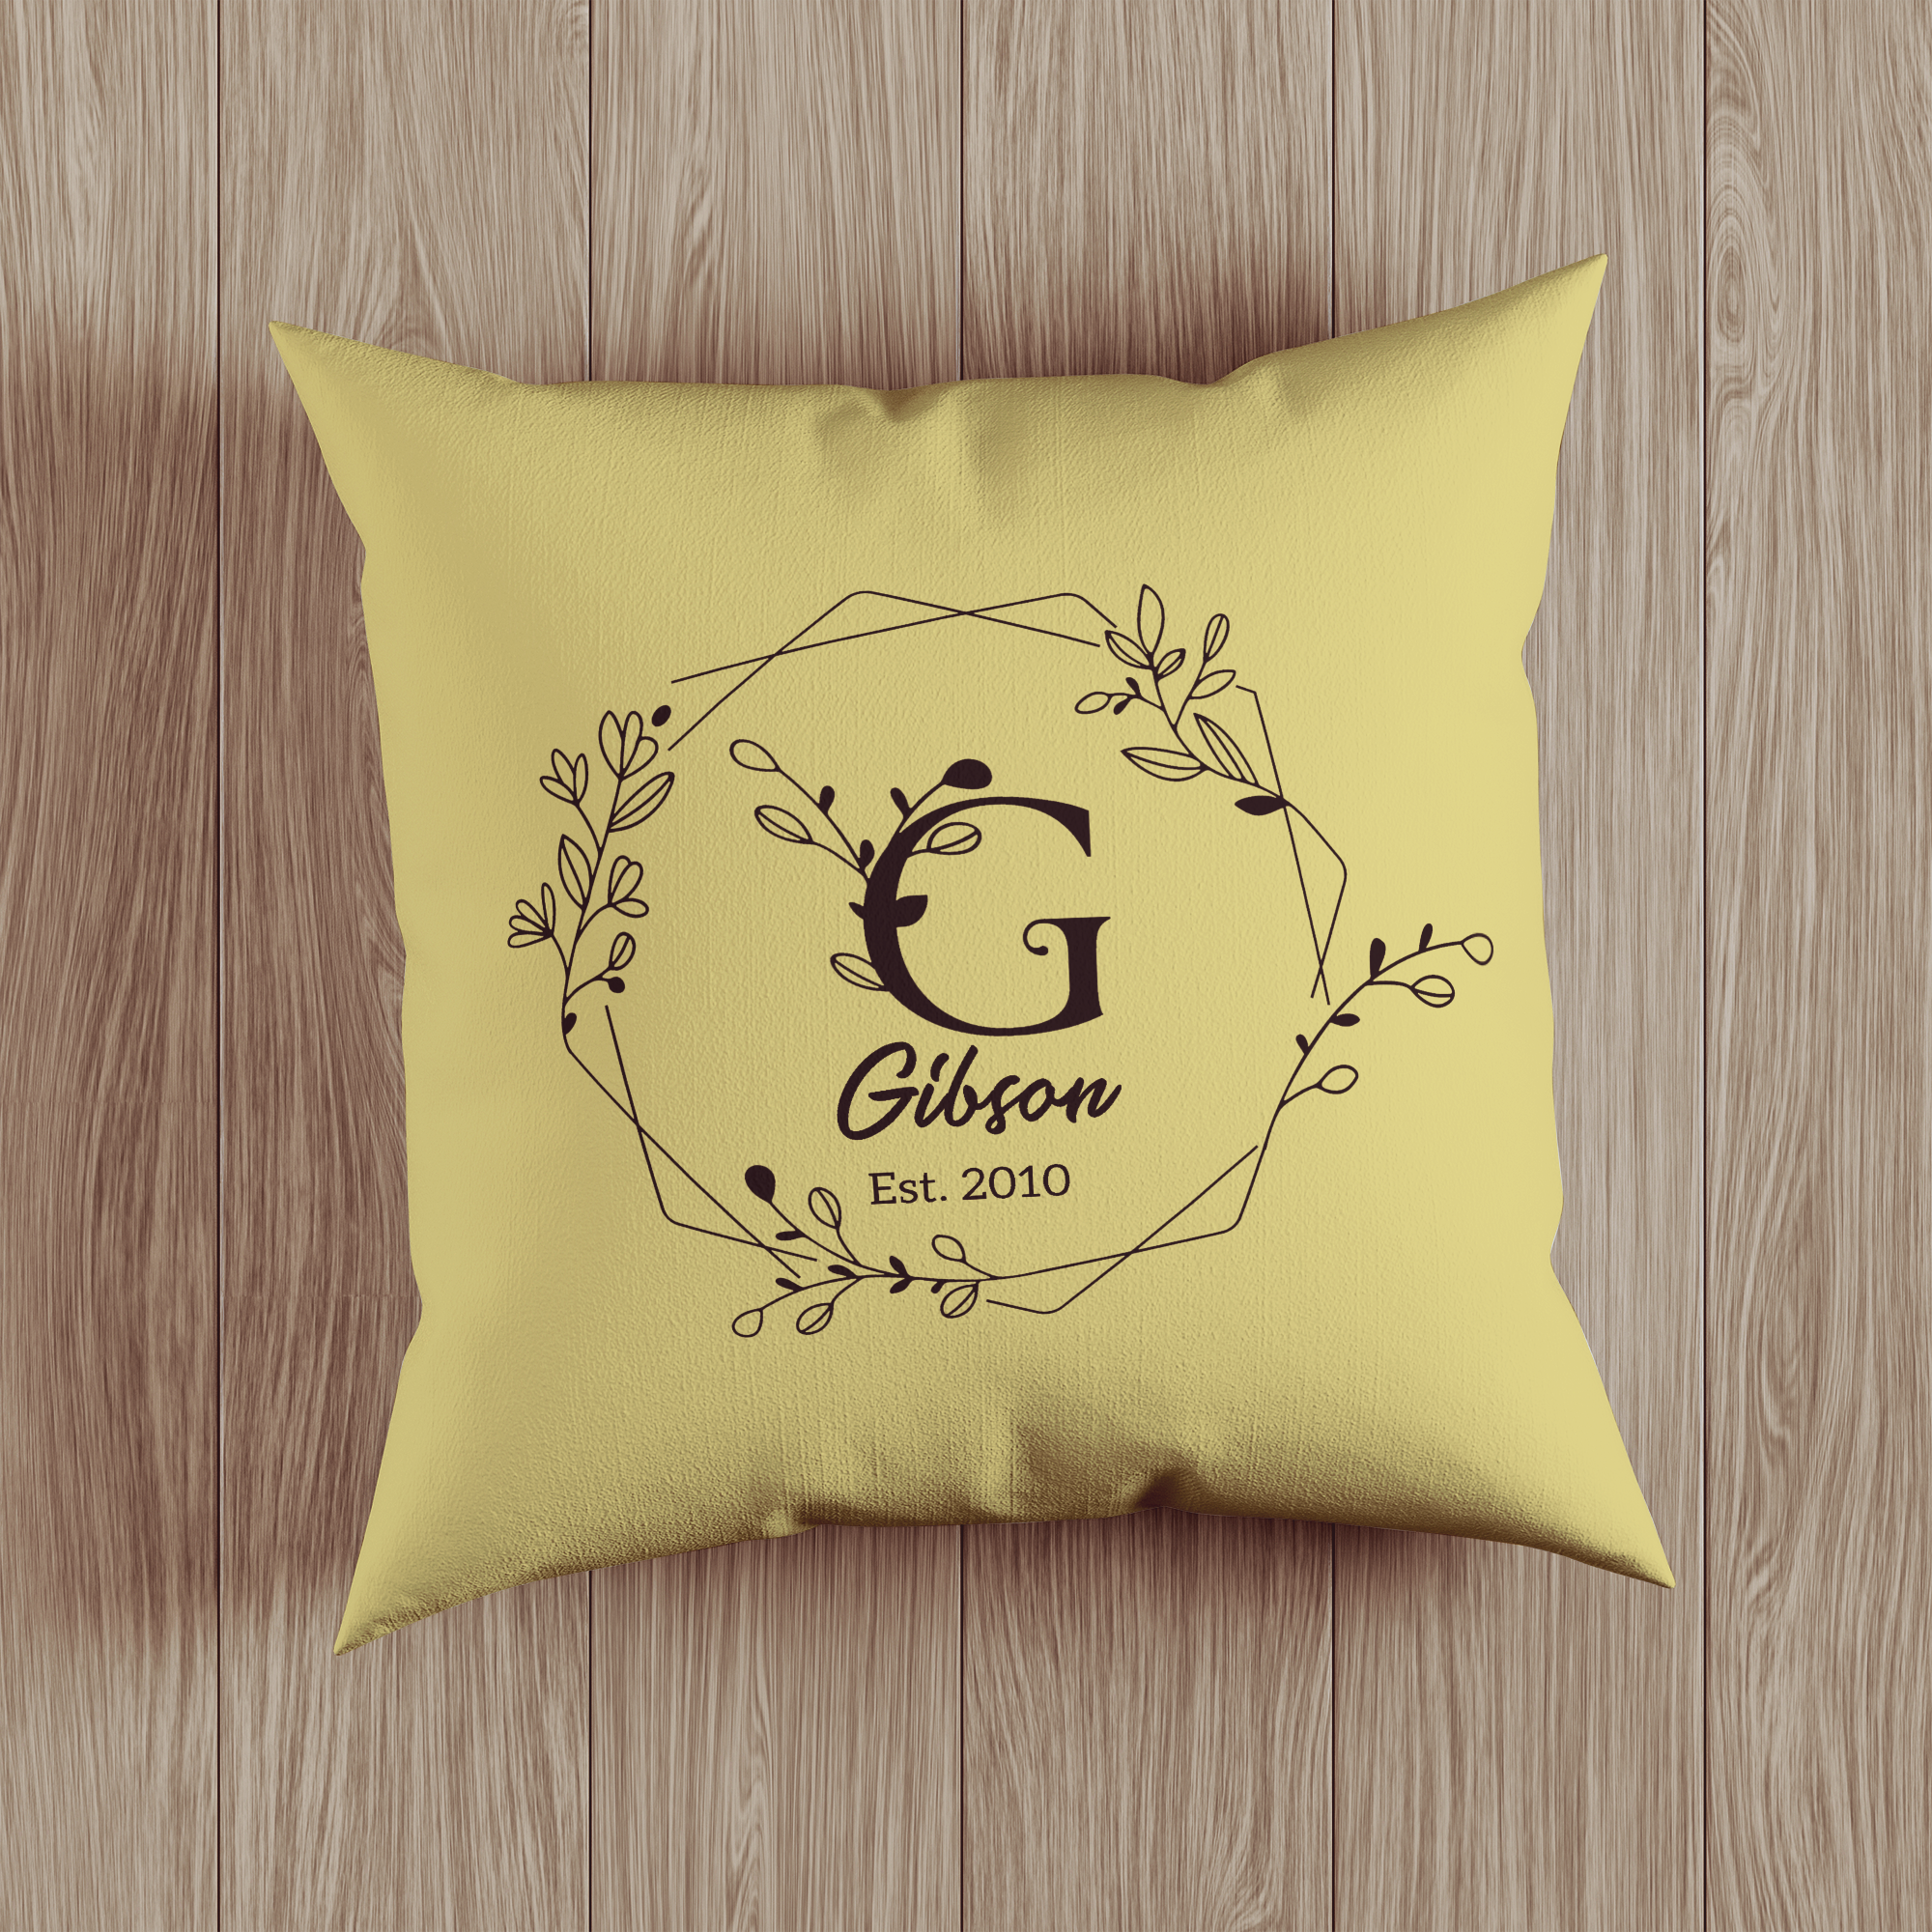 Sunflower Letter B Pillow Case, Floral Personalized Initial Cushion Cover,  Custom Monogram Pillow Case, Custom Pillow Cover,Throw Pillow, Pillow Cover